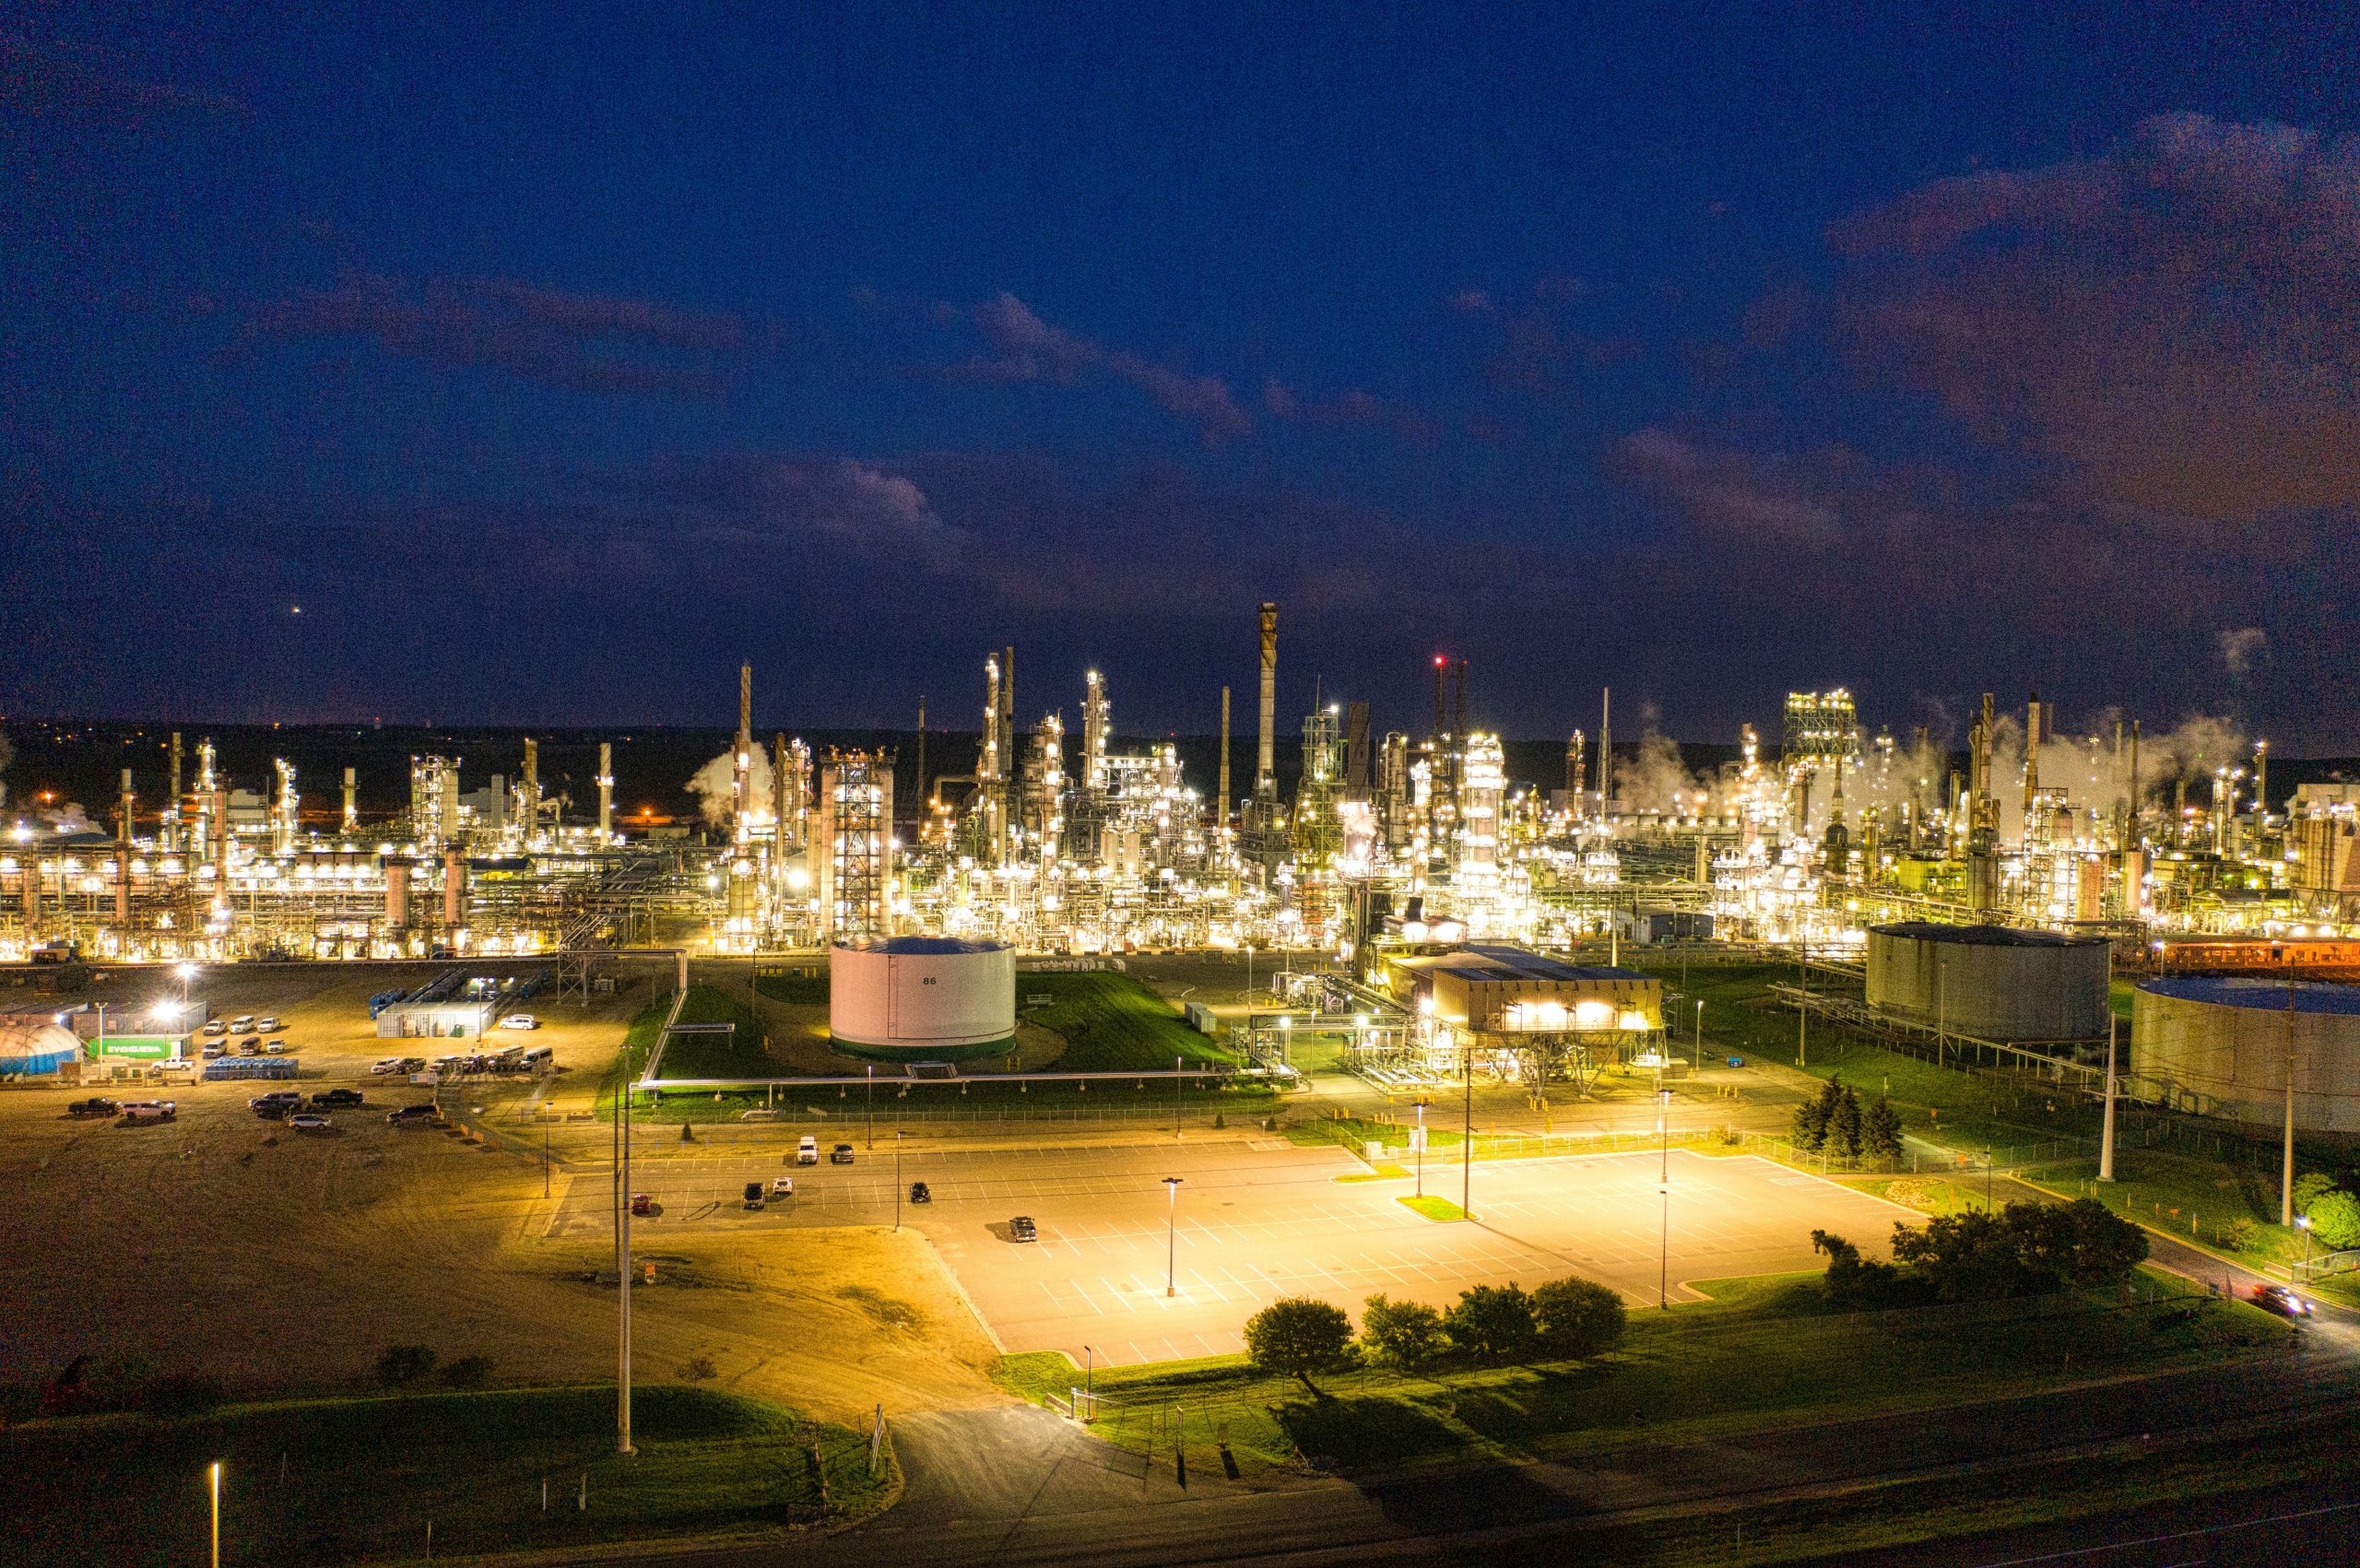  A photo illustrating oil and gas industry equipment and operations.